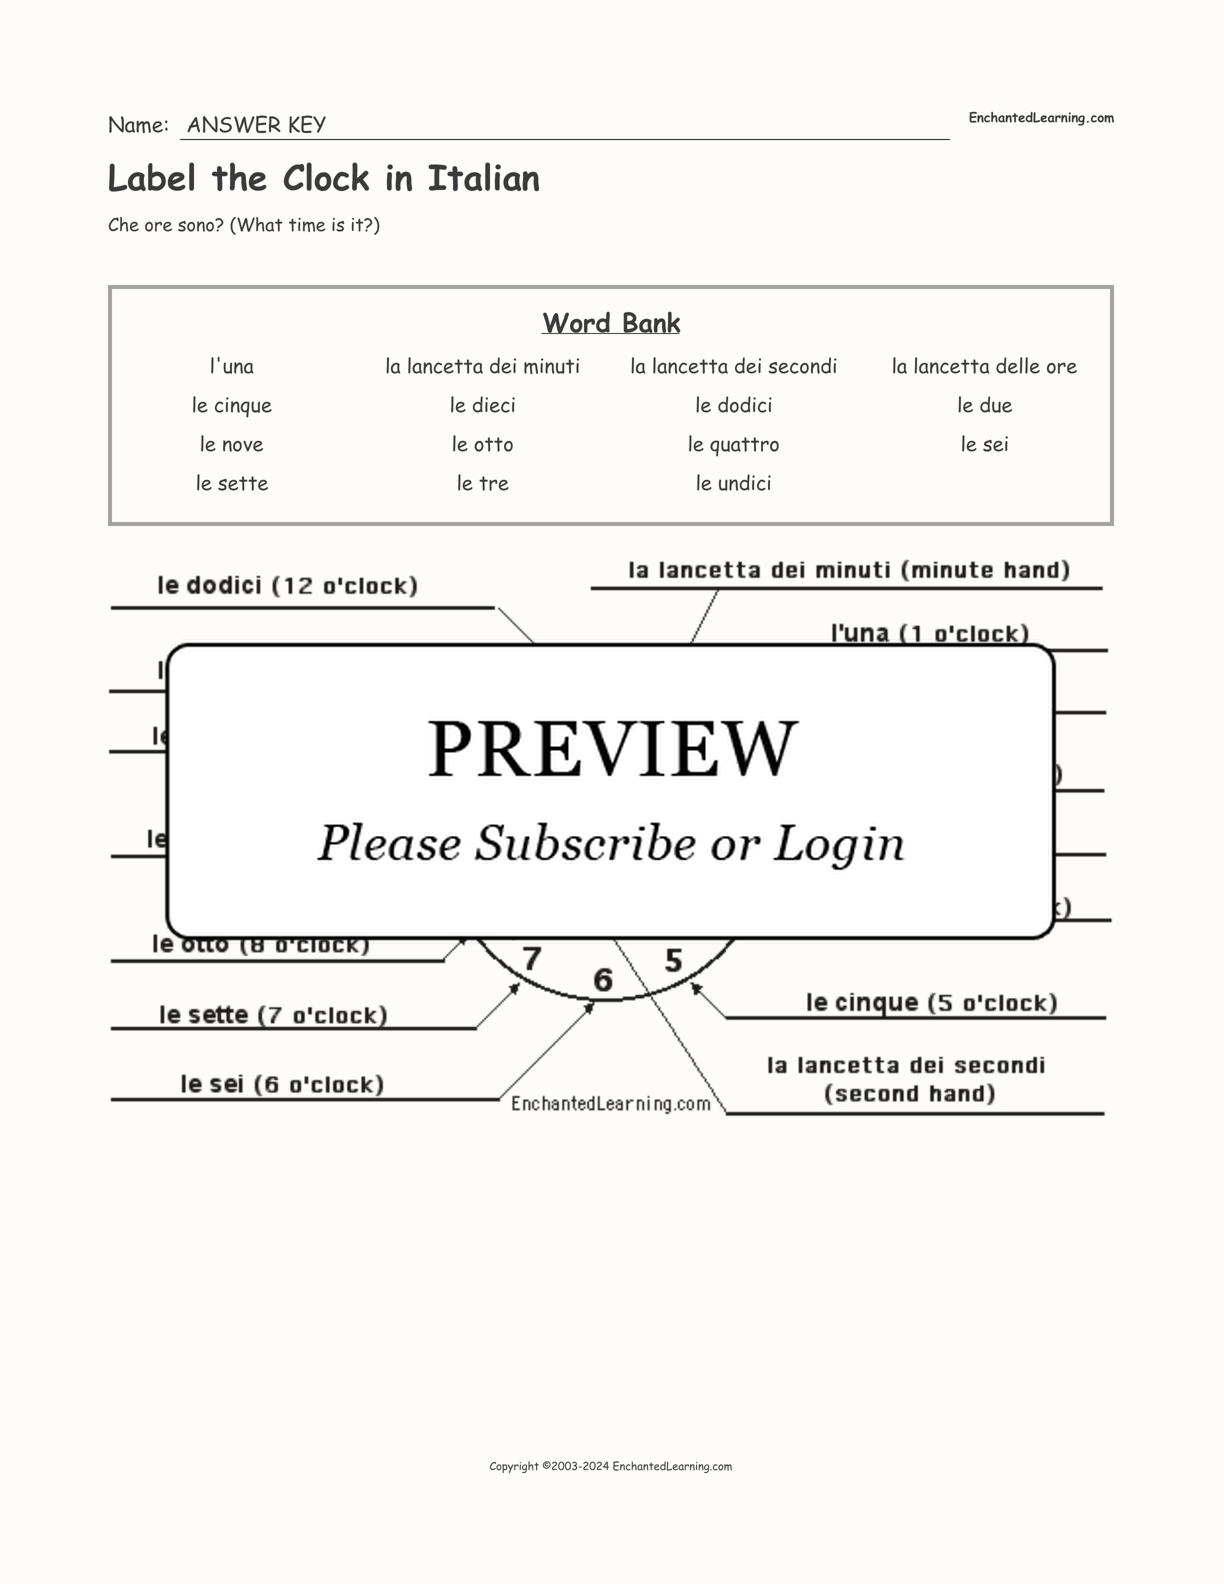 Label the Clock in Italian interactive worksheet page 2